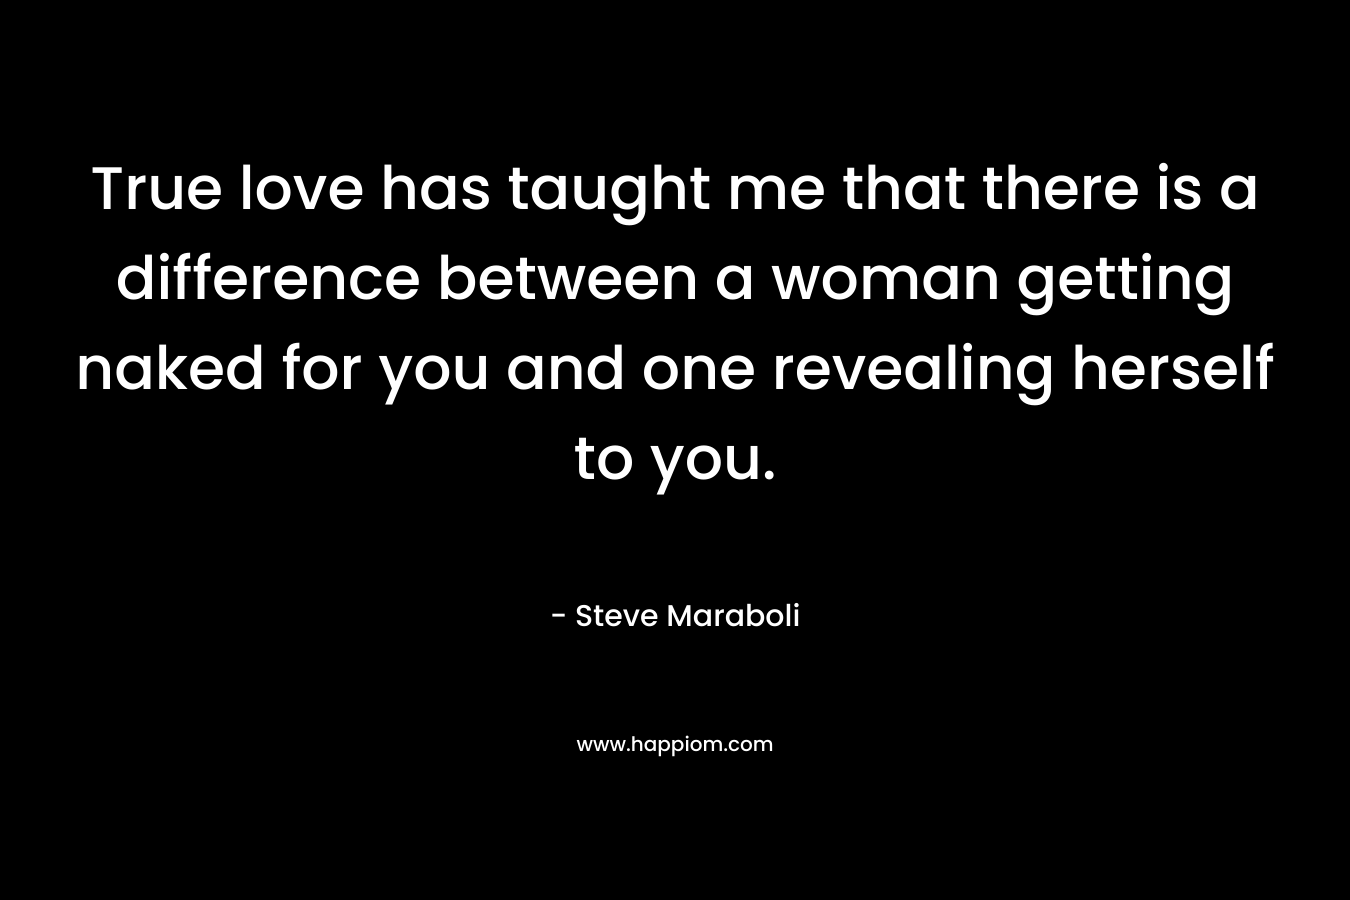 True love has taught me that there is a difference between a woman getting naked for you and one revealing herself to you. – Steve Maraboli